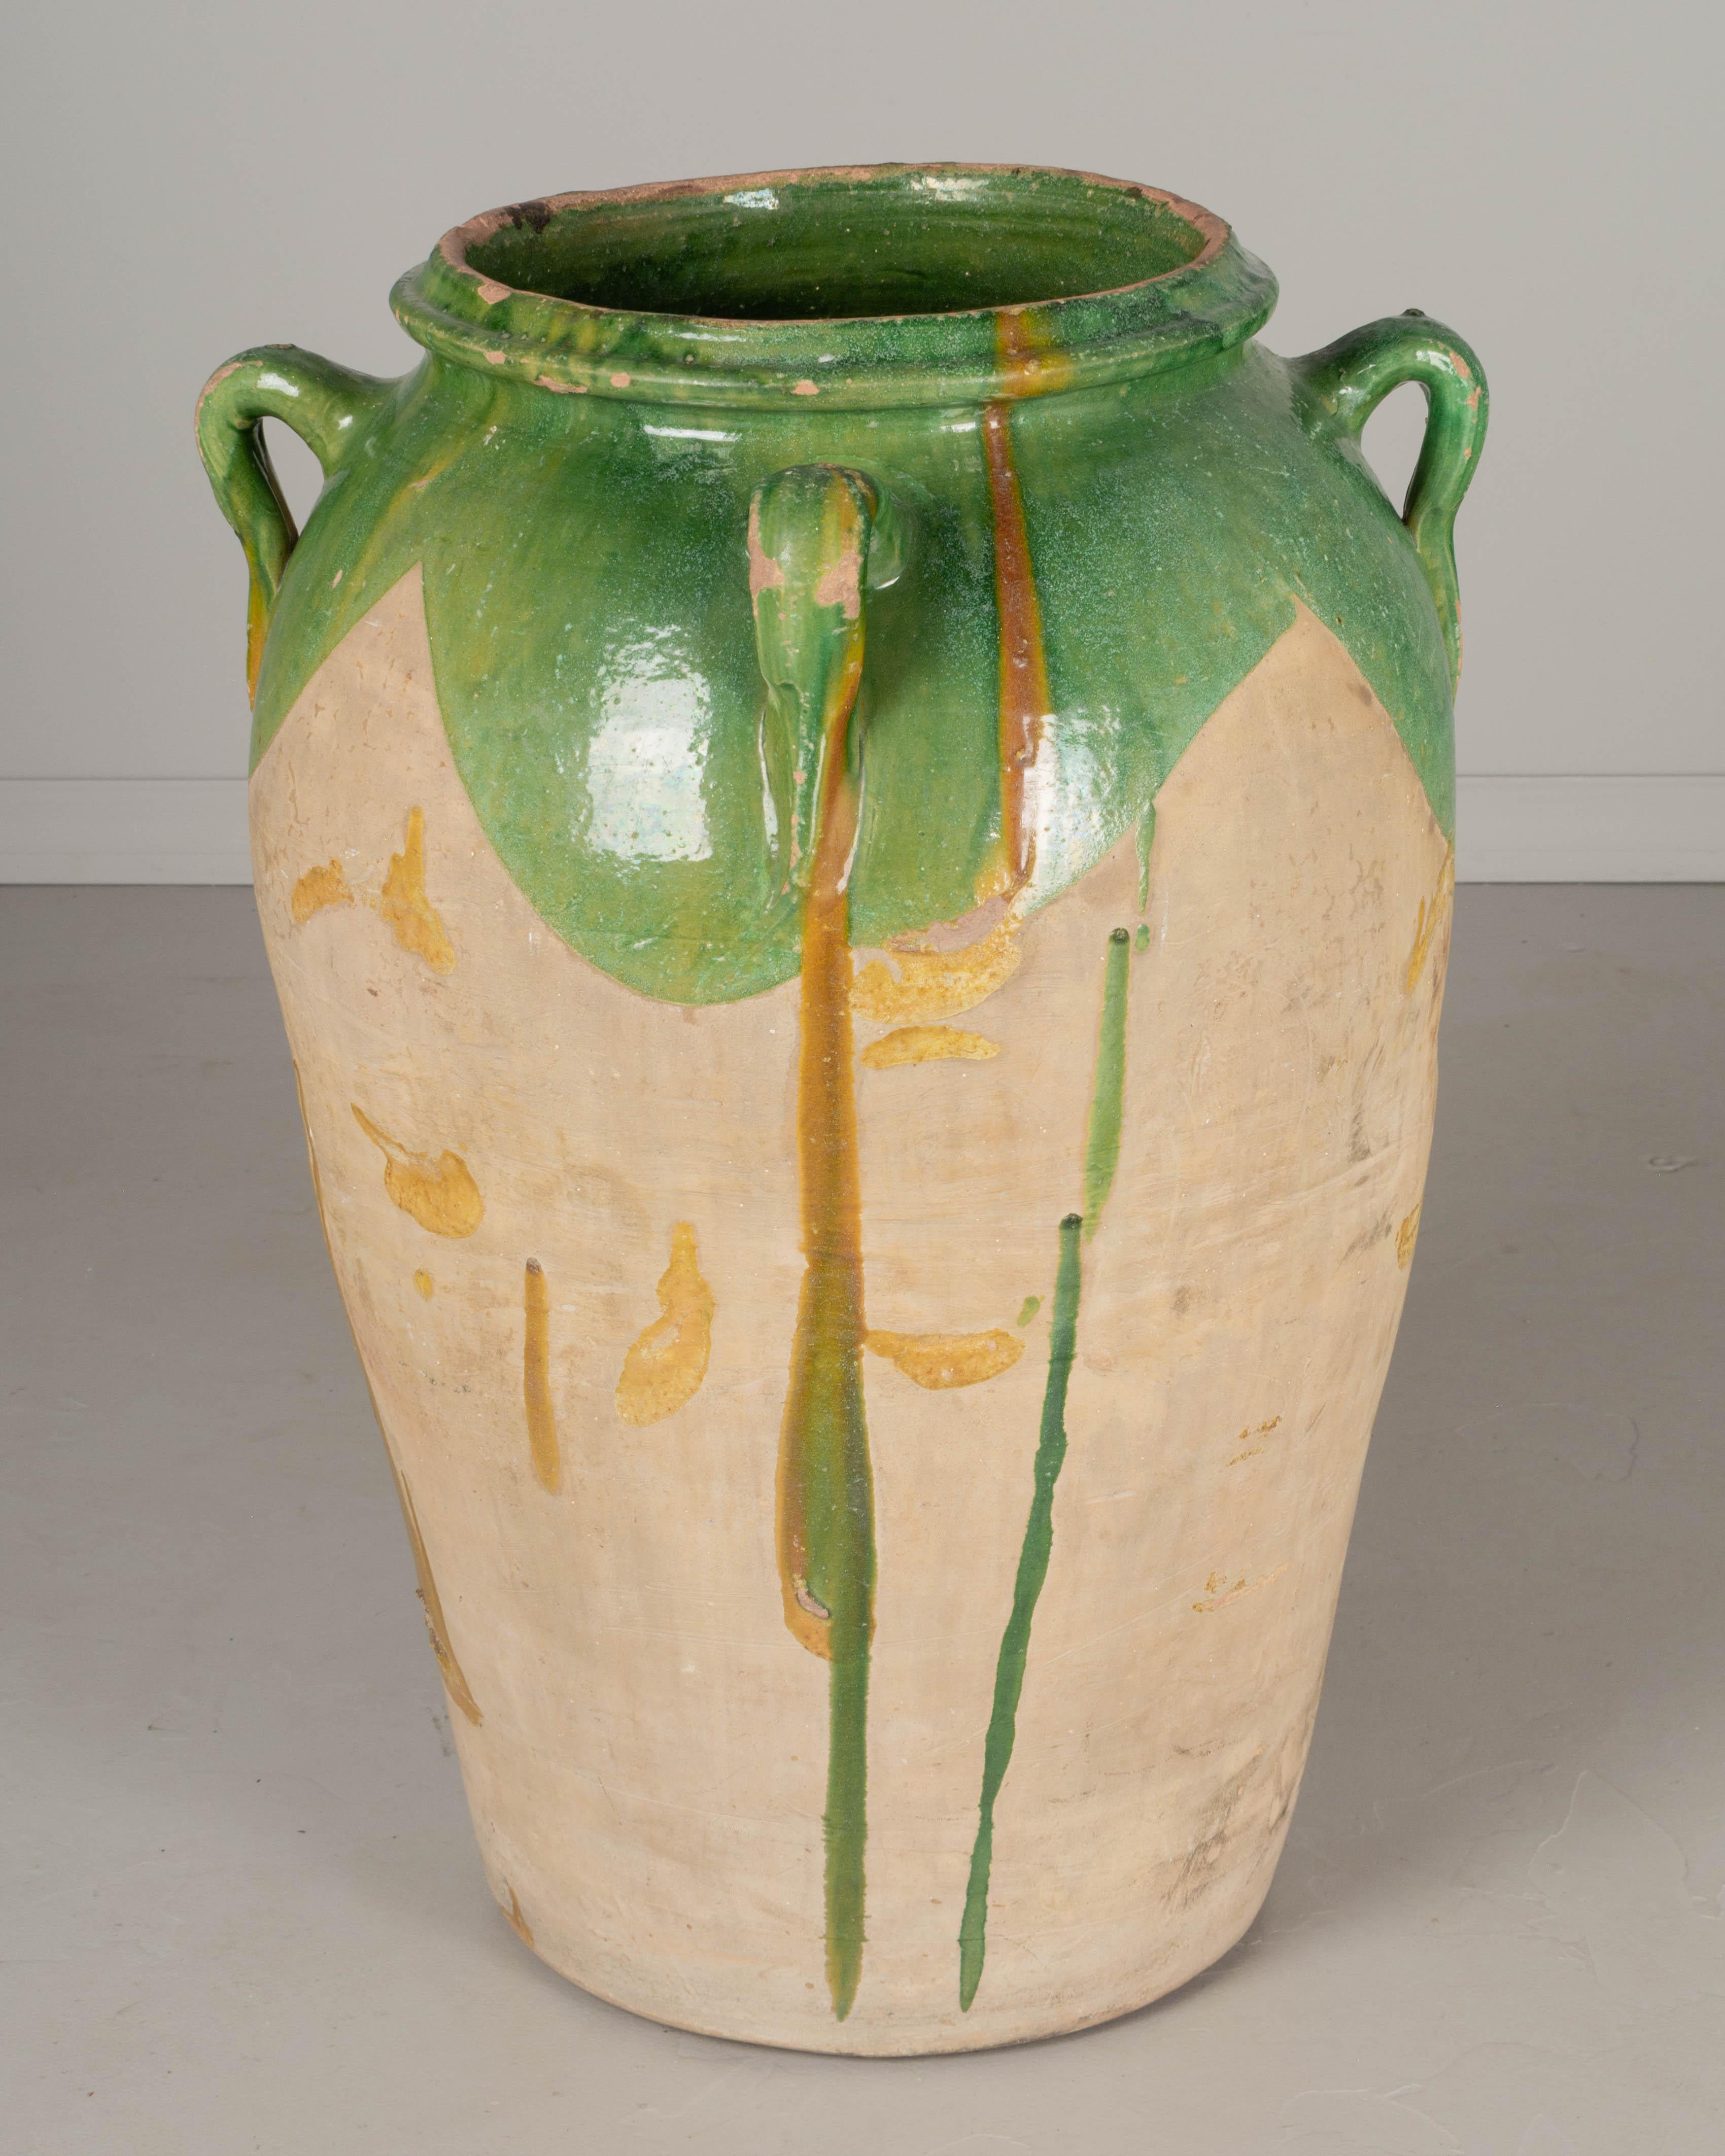 A large early 20th Century terracotta pottery jar from the Southwest of France. Classic urn shape with four small handles. Green glazed top and unglazed body with green and yellow ochre drips. A beautiful garden ornament, fountain, or planter,